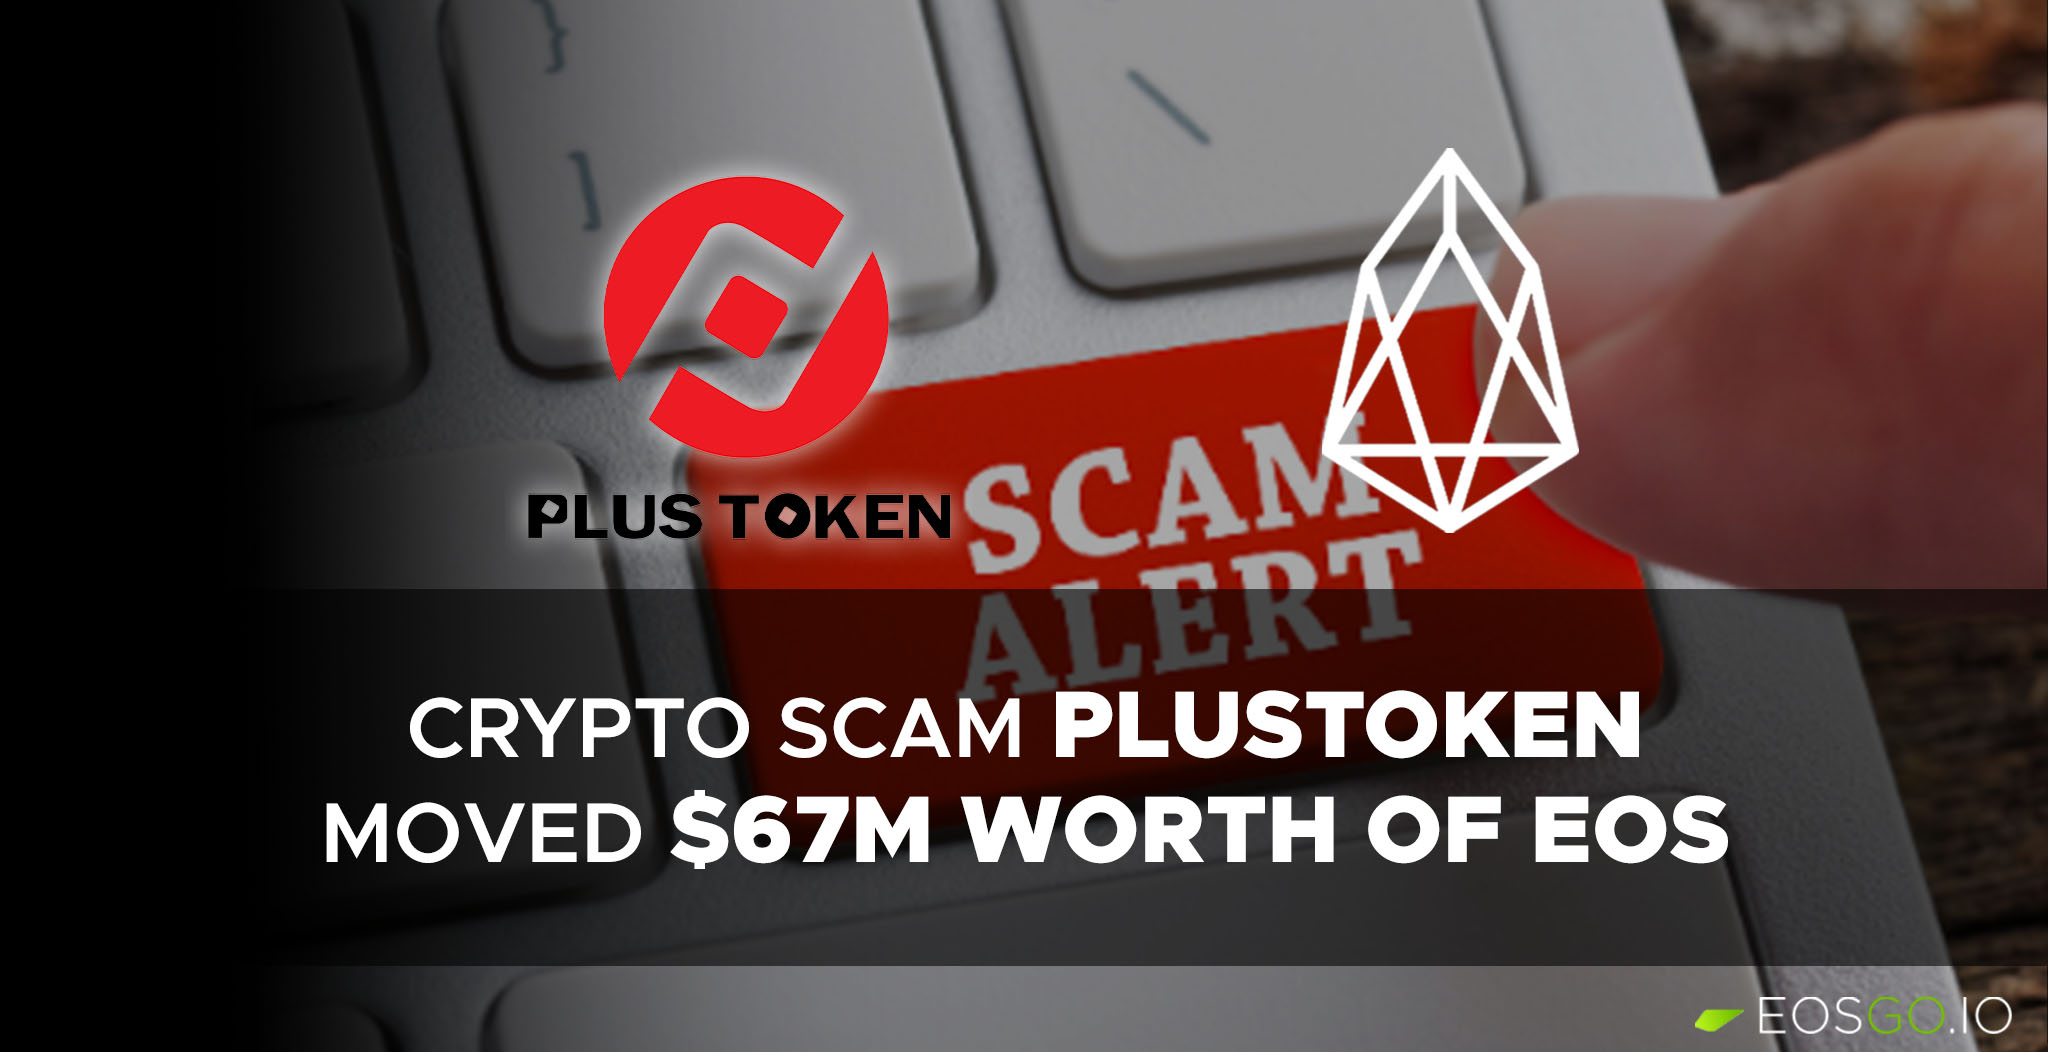 Crypto Scam PlusToken moved $67M worth of EOS